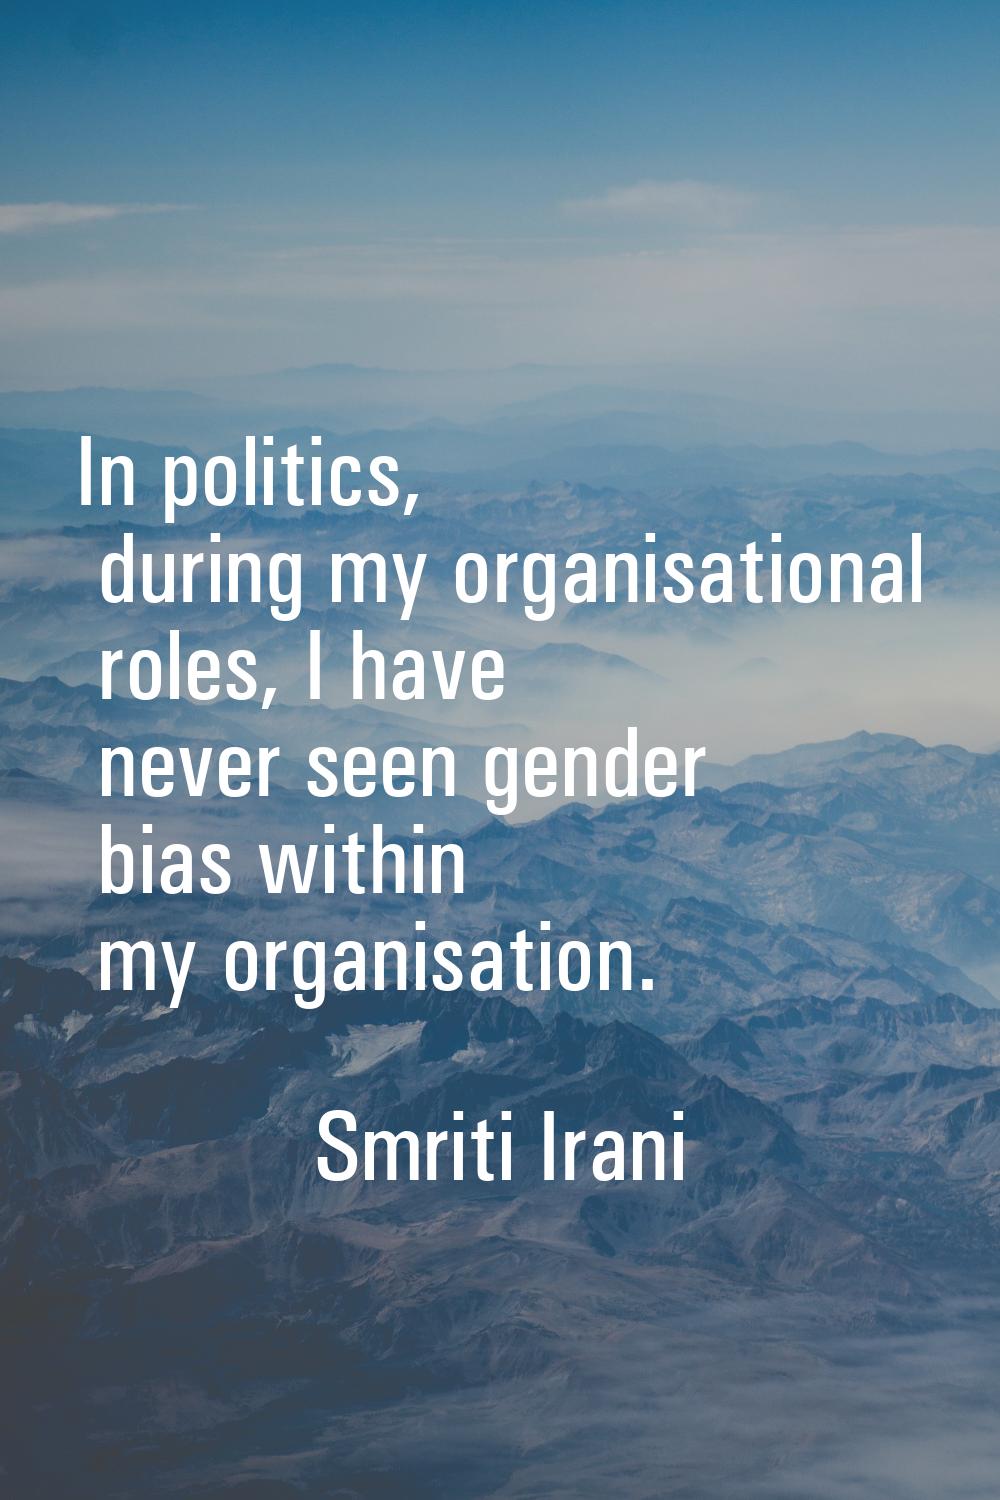 In politics, during my organisational roles, I have never seen gender bias within my organisation.